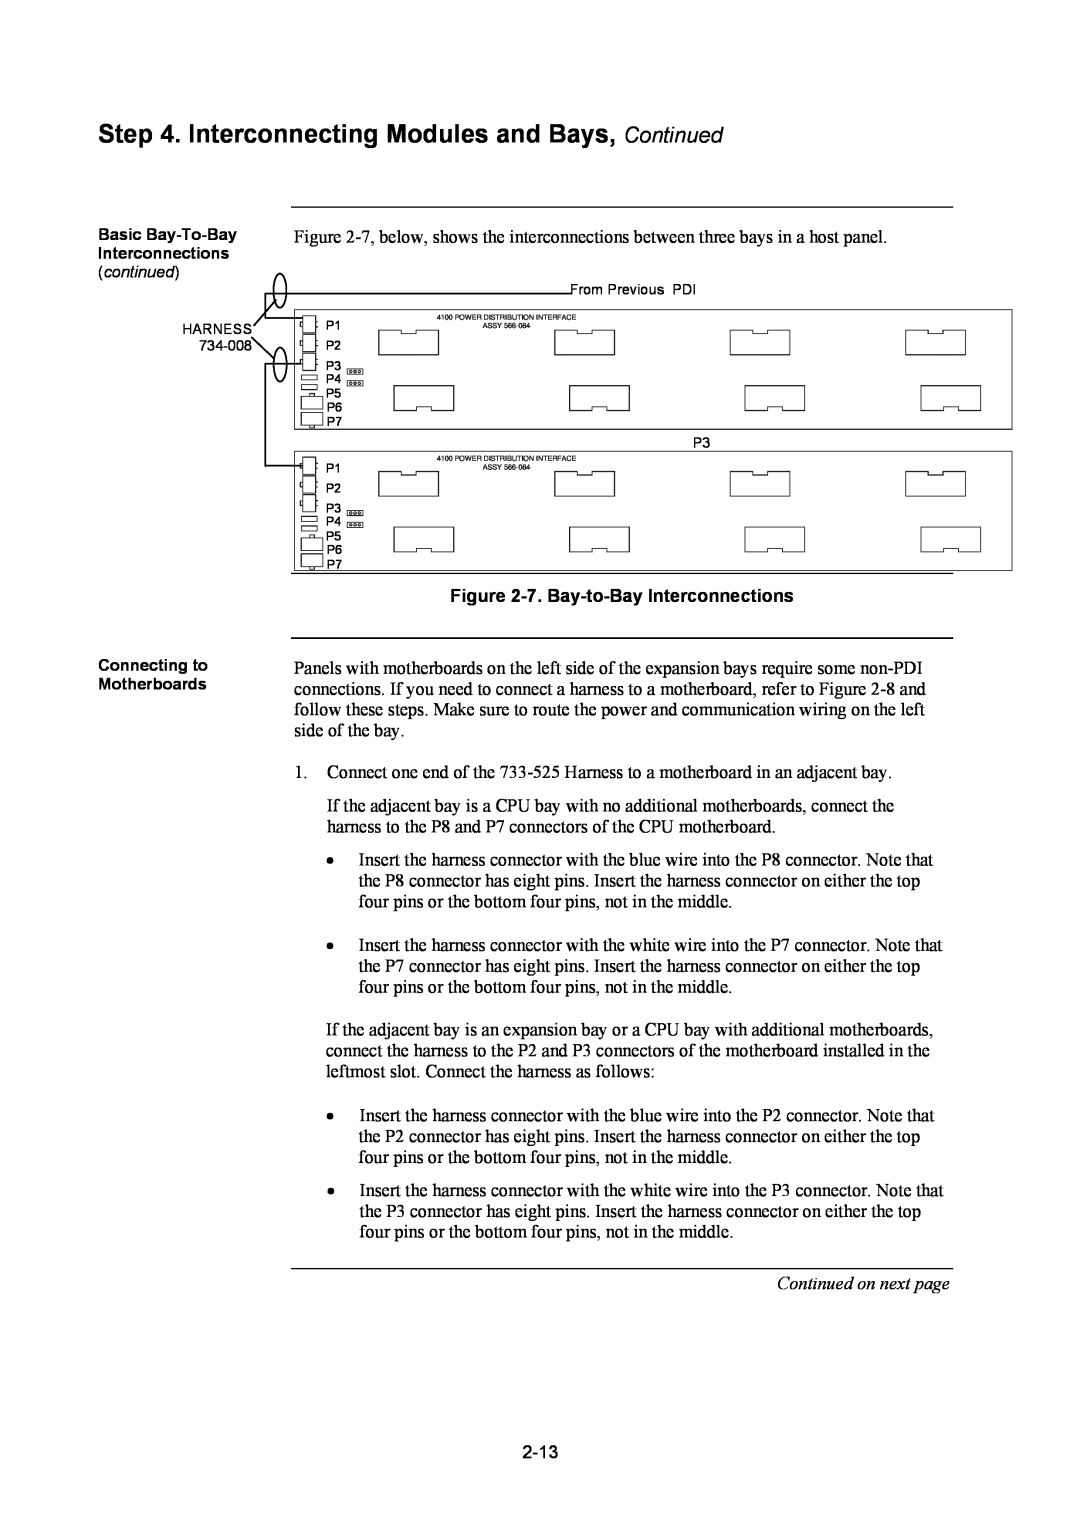 Tyco 4100U 7. Bay-to-BayInterconnections, Continued on next page, Basic Bay-To-BayInterconnections continued 